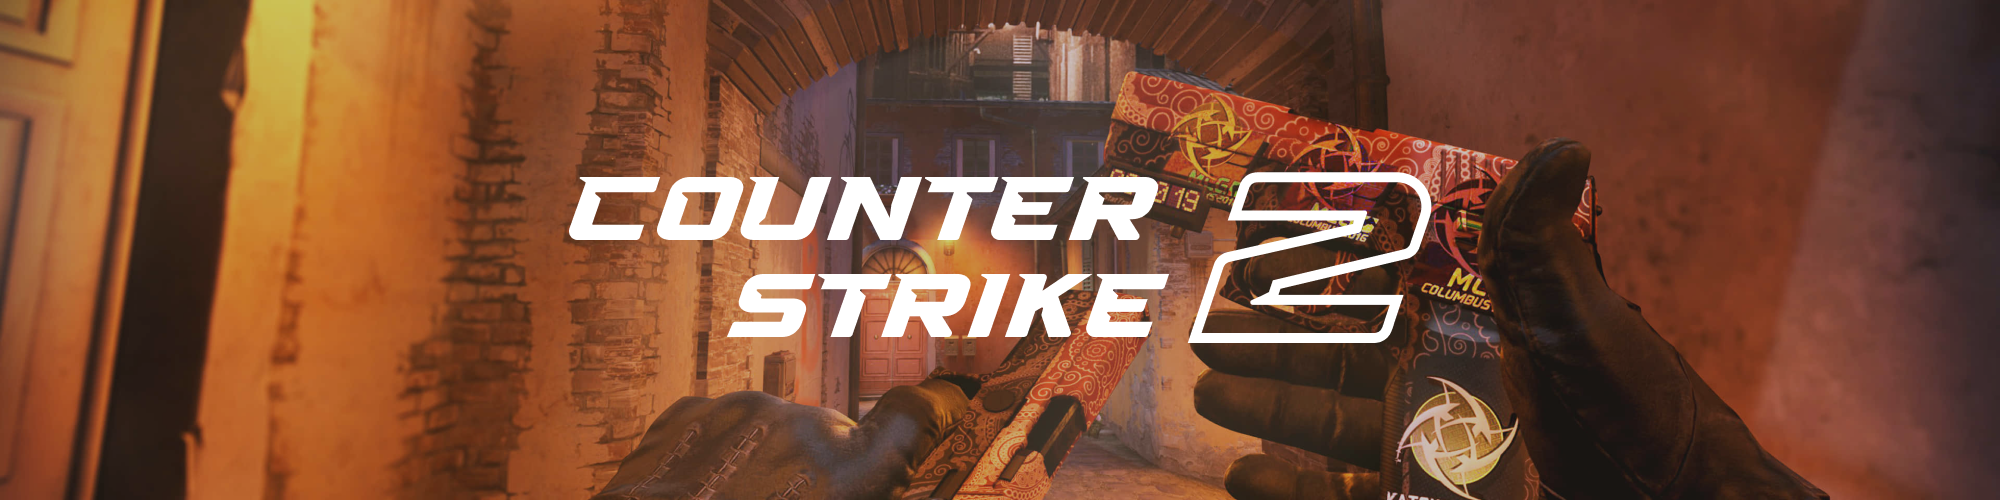 Counter-Strike 2 Has Launched!